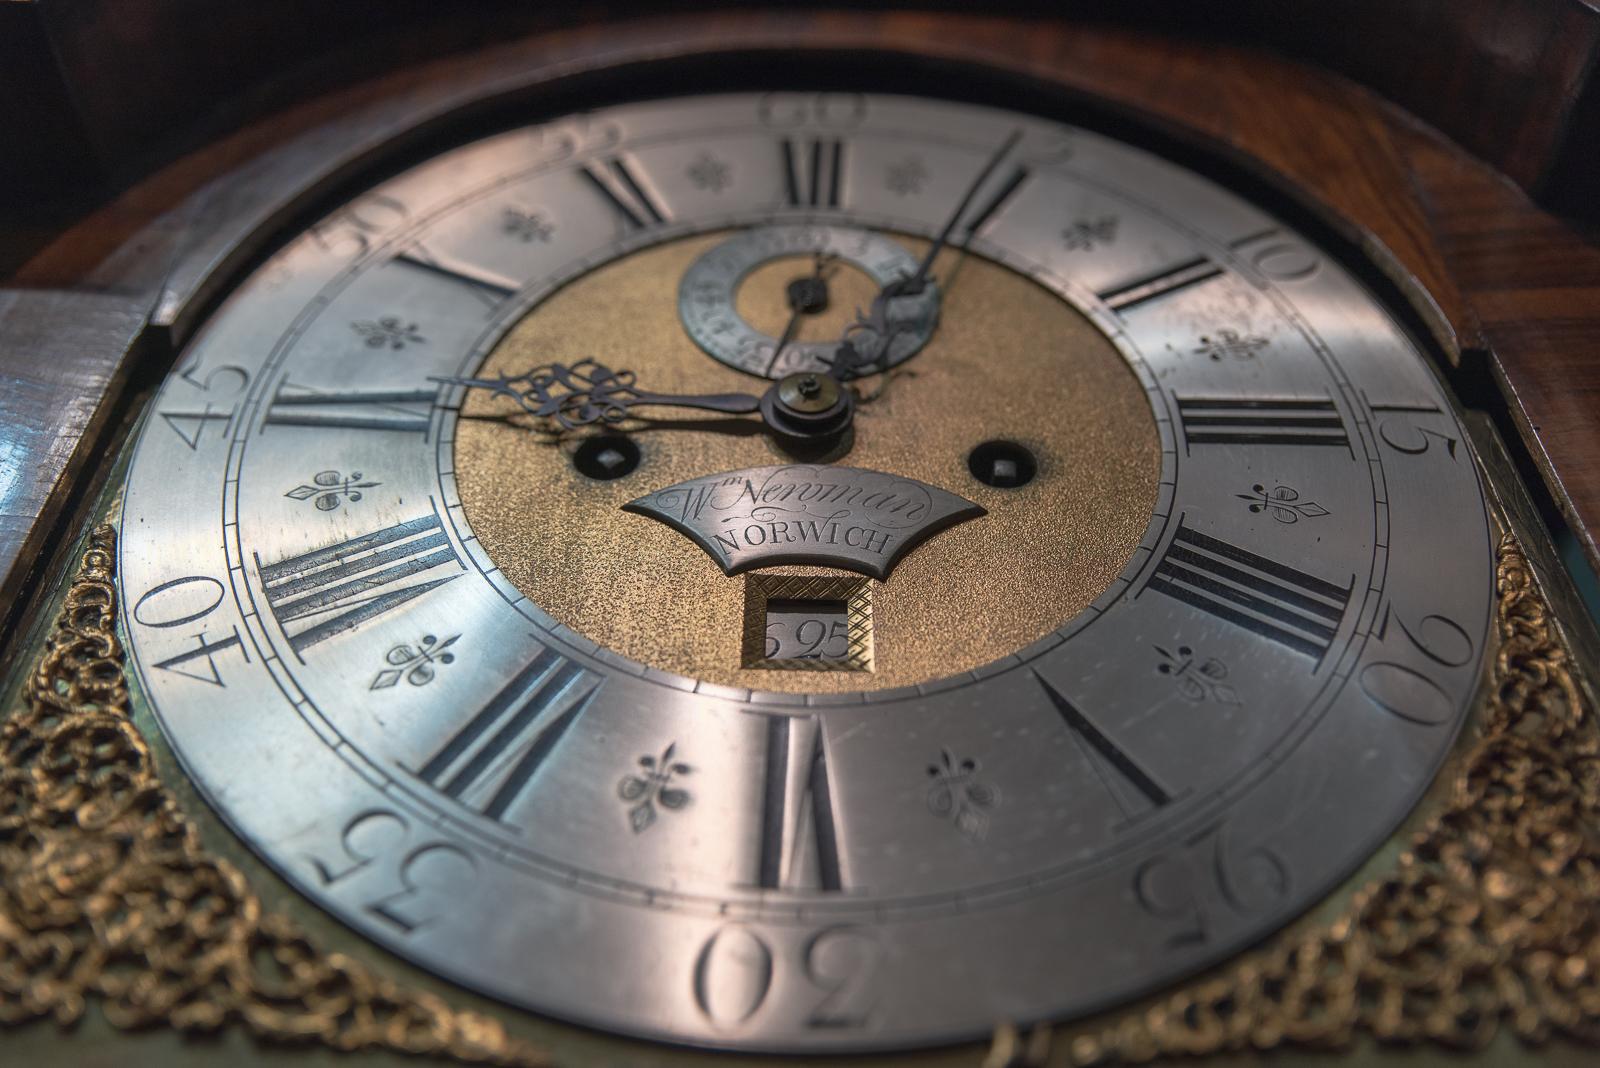 An 8 day striking the hours clock in a superb walnut case by the maker William Newman of Norwich (recorded working circa. 1687-1739) who made very high quality clocks.
The dial of this clock is in the distinctive manner of Pinchbeck, Gregg and